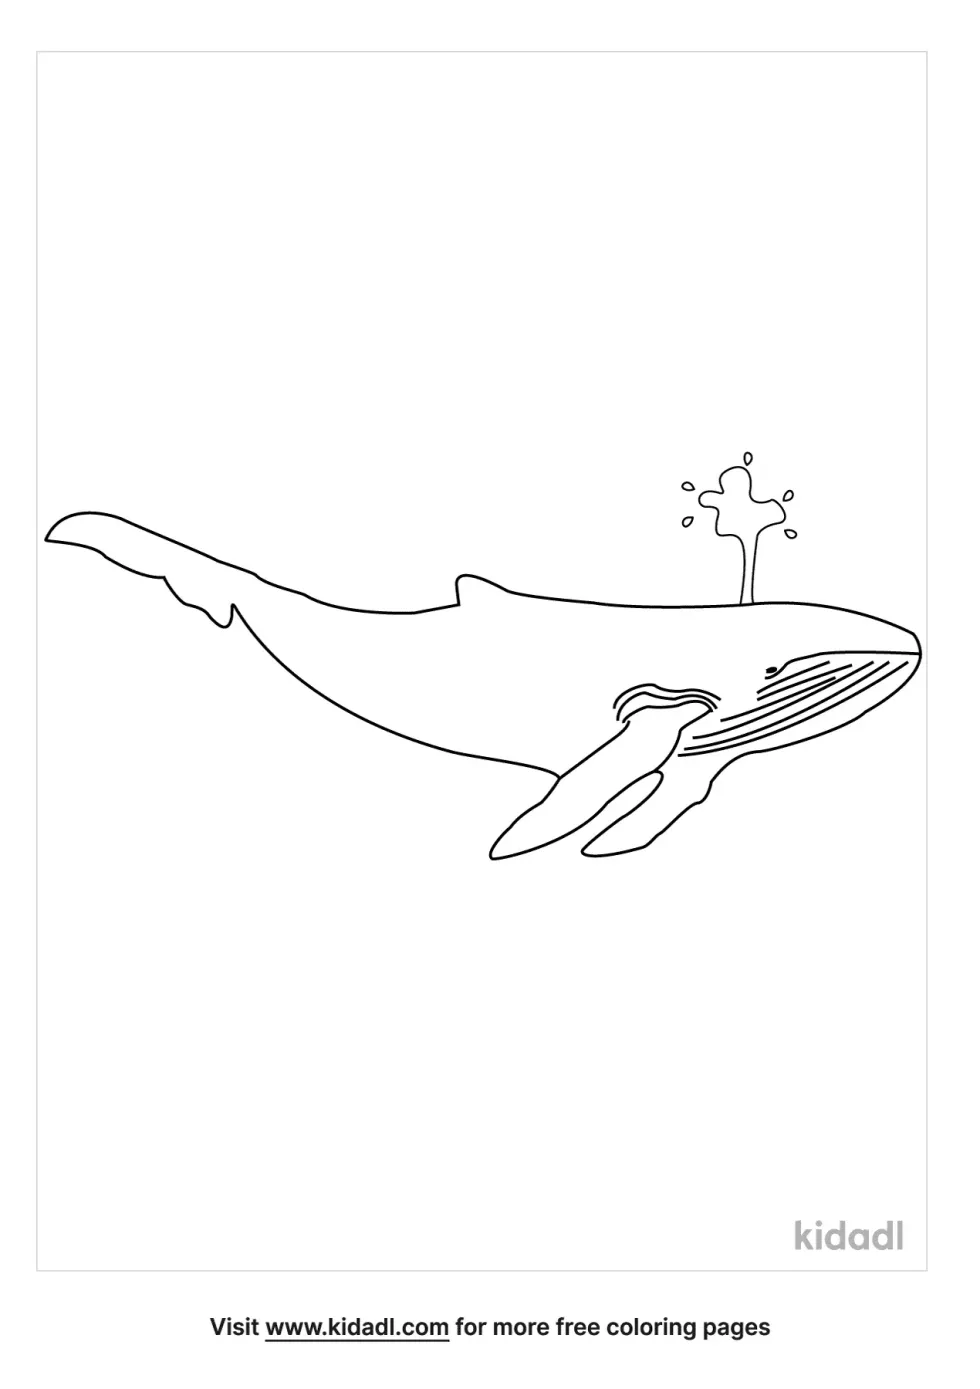 Whale Blowing Water Coloring Page